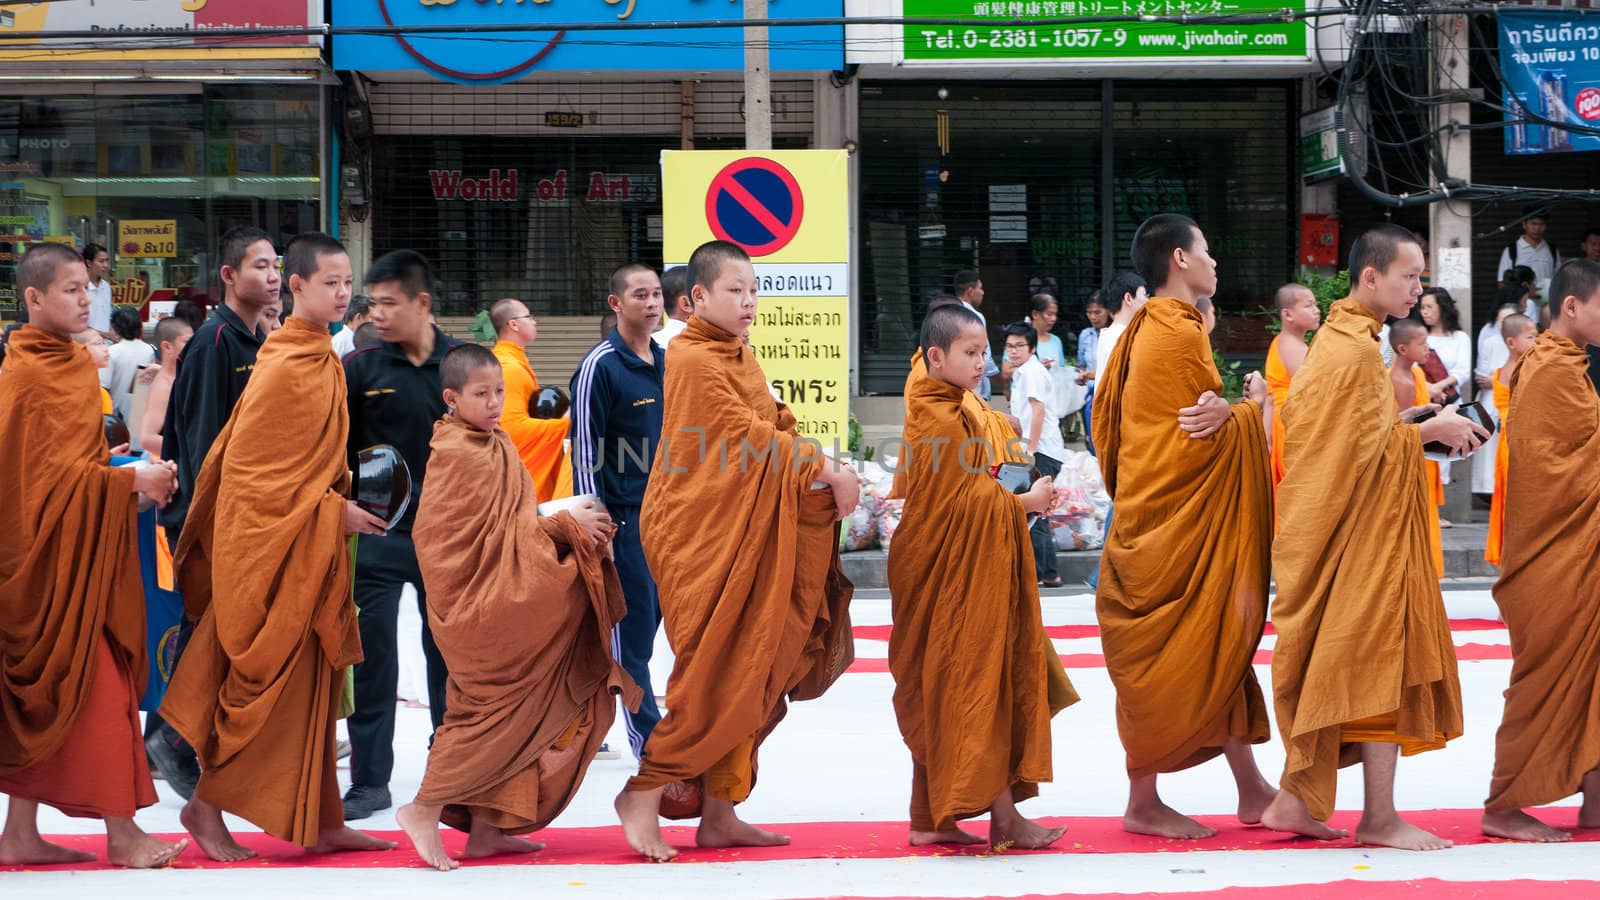 BANGKOK - DECEMBER 23: Monks participating in a mass alms giving in the morning at Soi Thonglor in celebration of the 2,600th anniversary of Lord Buddha's enlightenment on December 23, 2012 in Bangkok, Thailand.